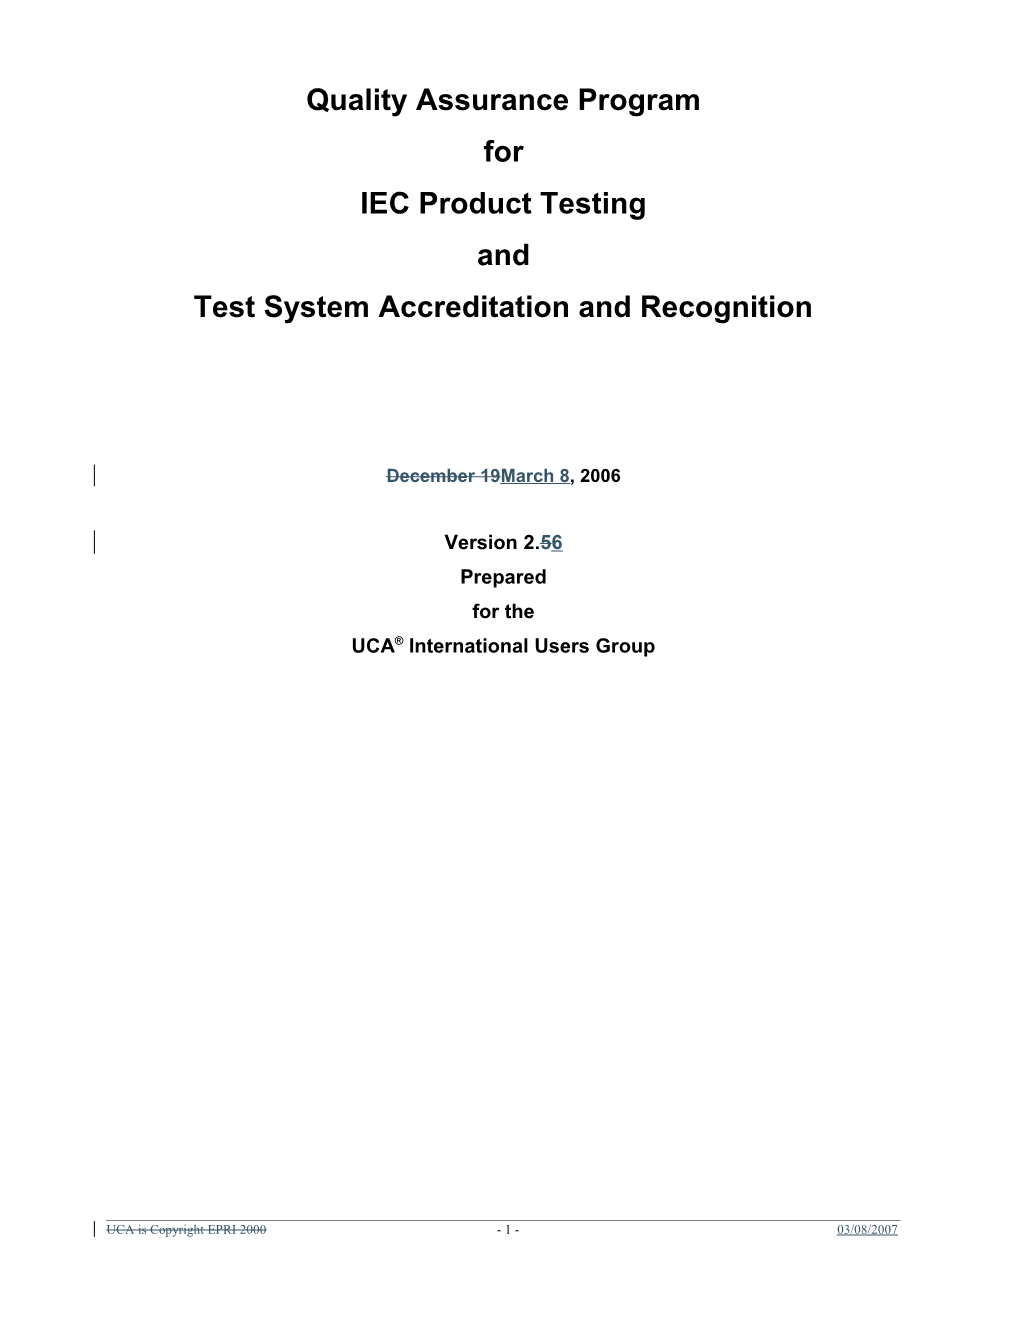 Test System Accreditation and Recognition